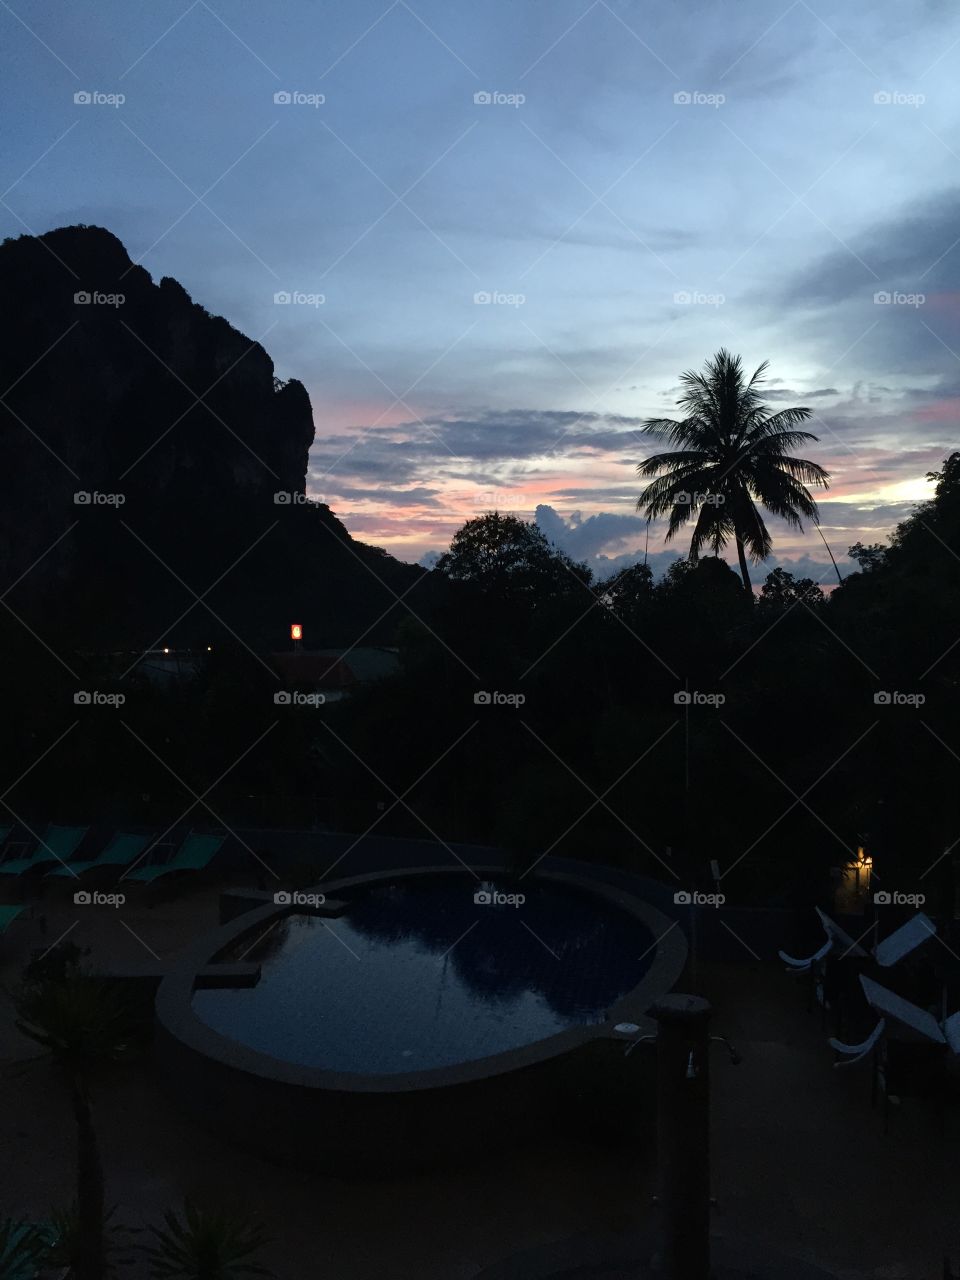 Sunset in Krabi, Thailand. Only one night at this hotel in Krabi but managed to catch this view. Enough, I think. 